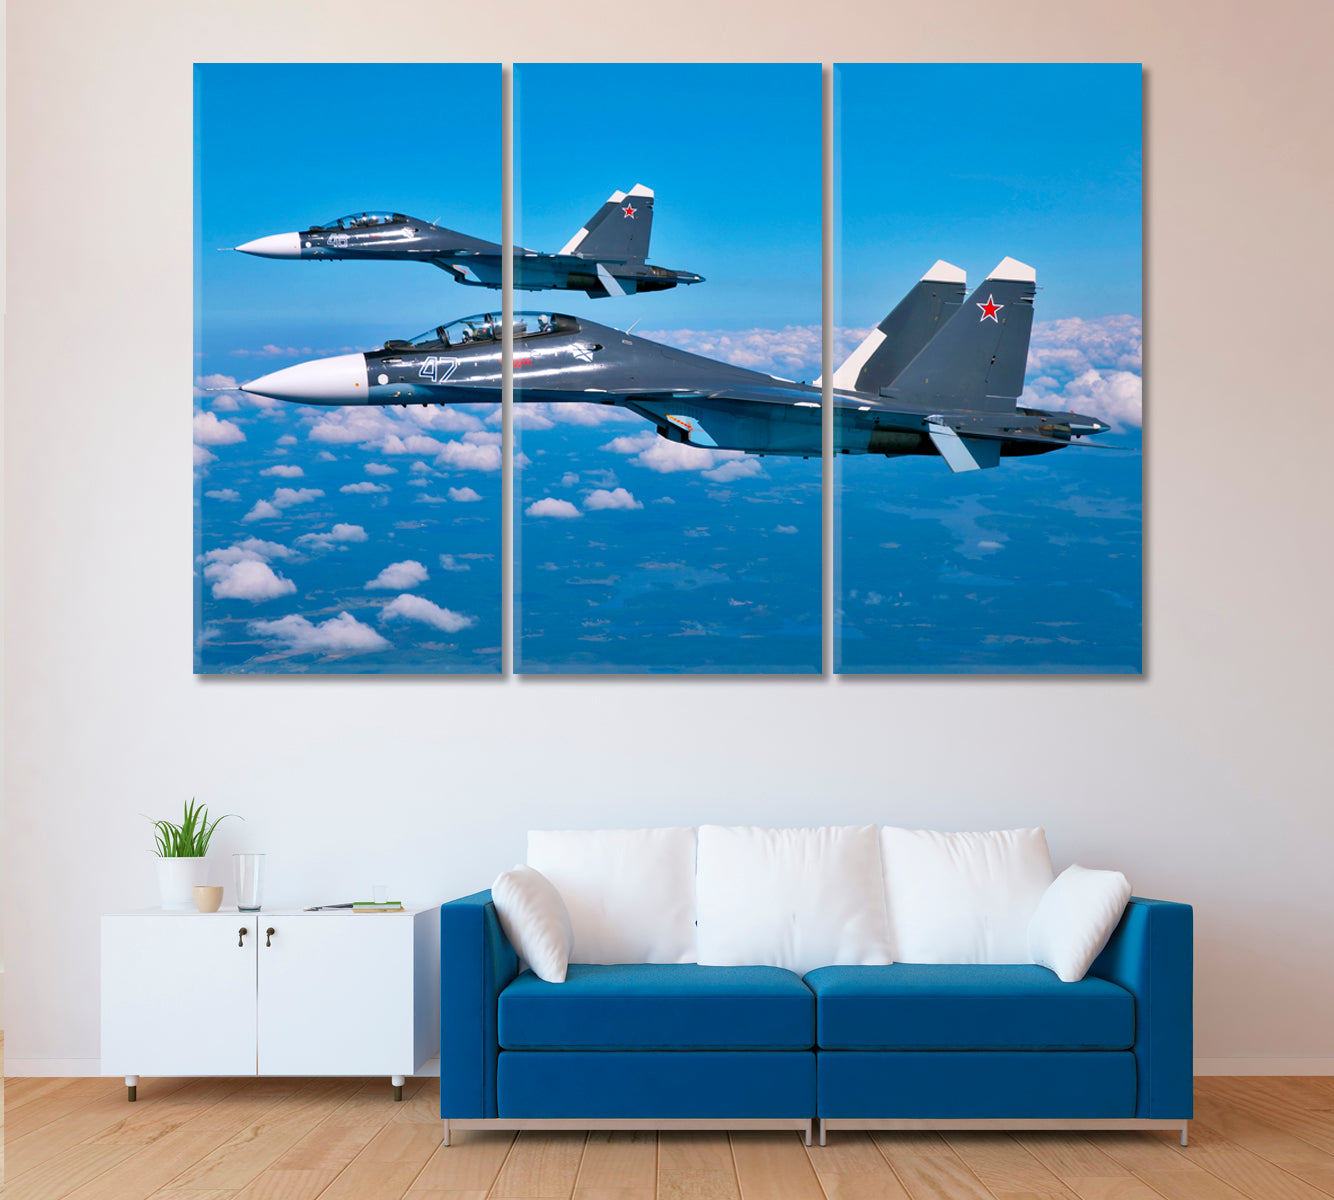 Sukhoi Su-30SM (Flanker-C) Jet in Flight Canvas Print ArtLexy 3 Panels 36"x24" inches 